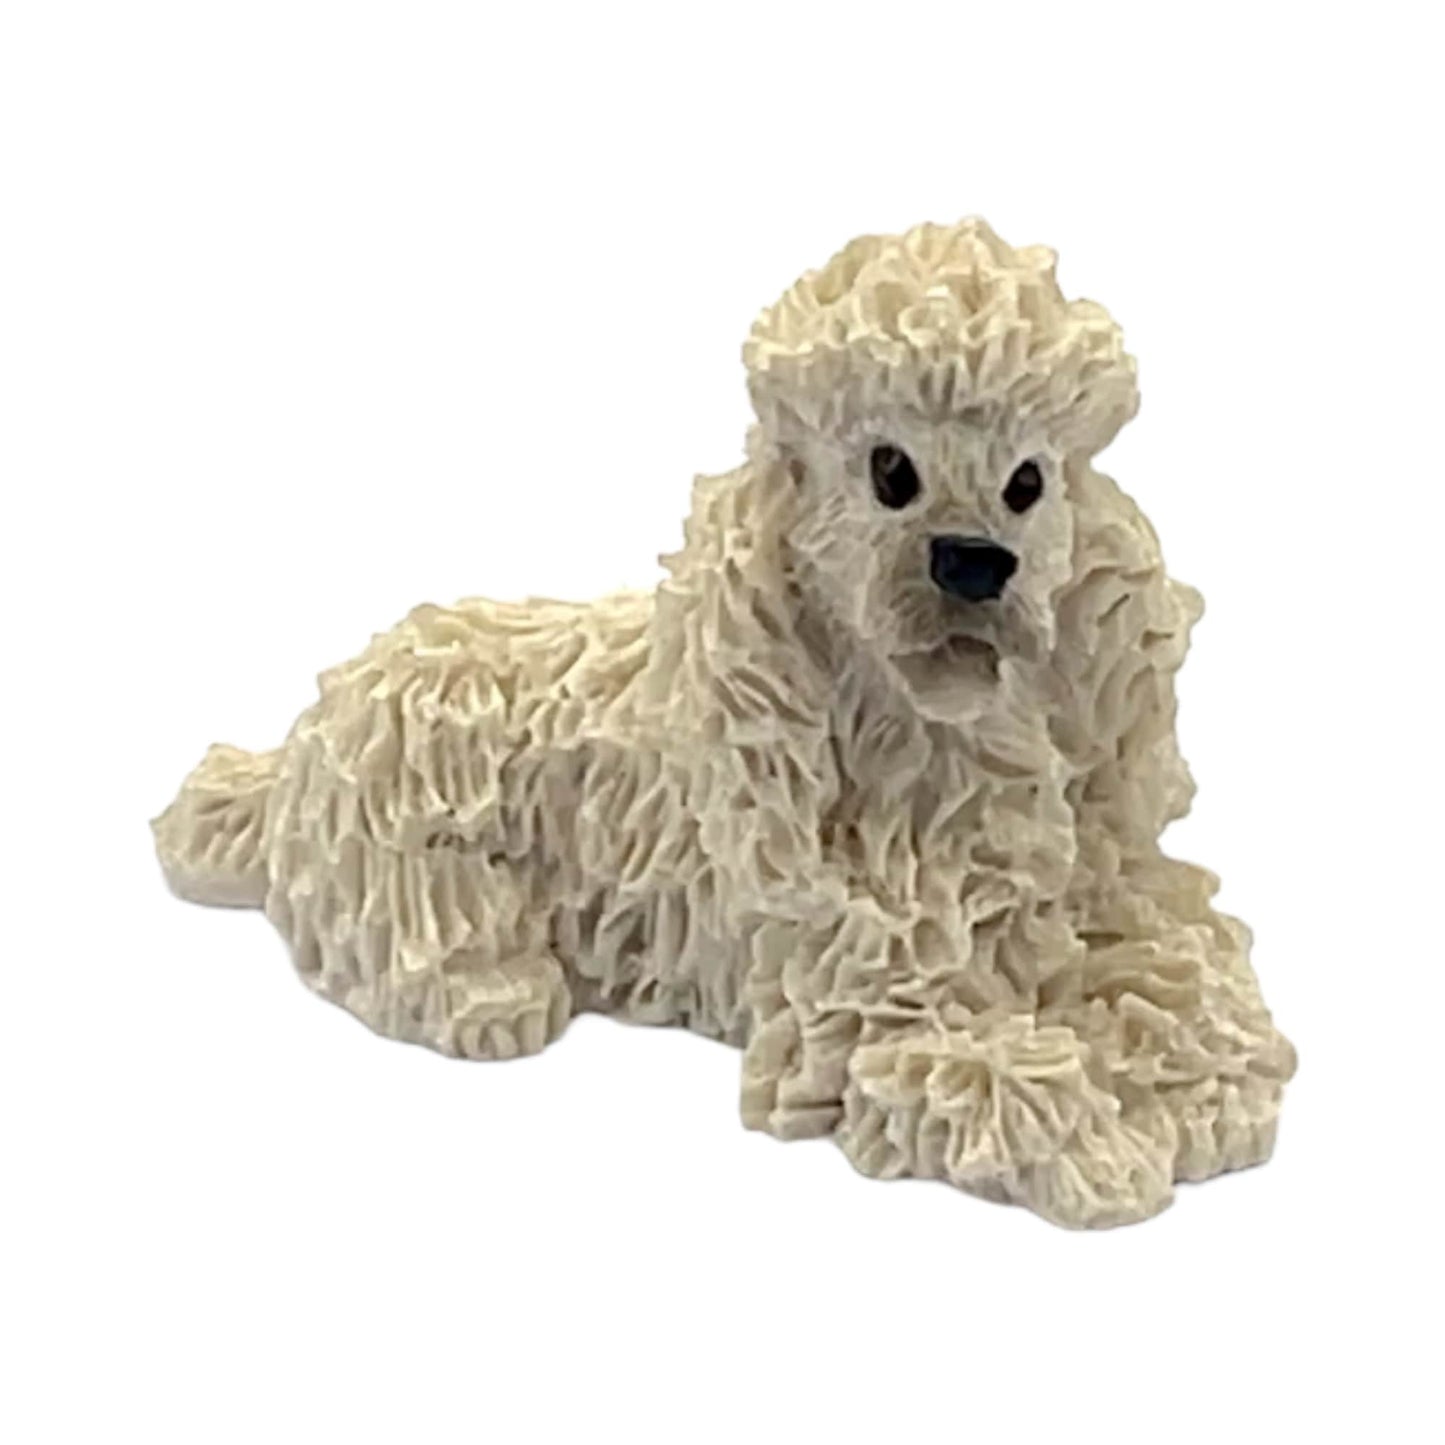 Sandicast  - Poodle - Laying Down - 1.5" x 2.5"